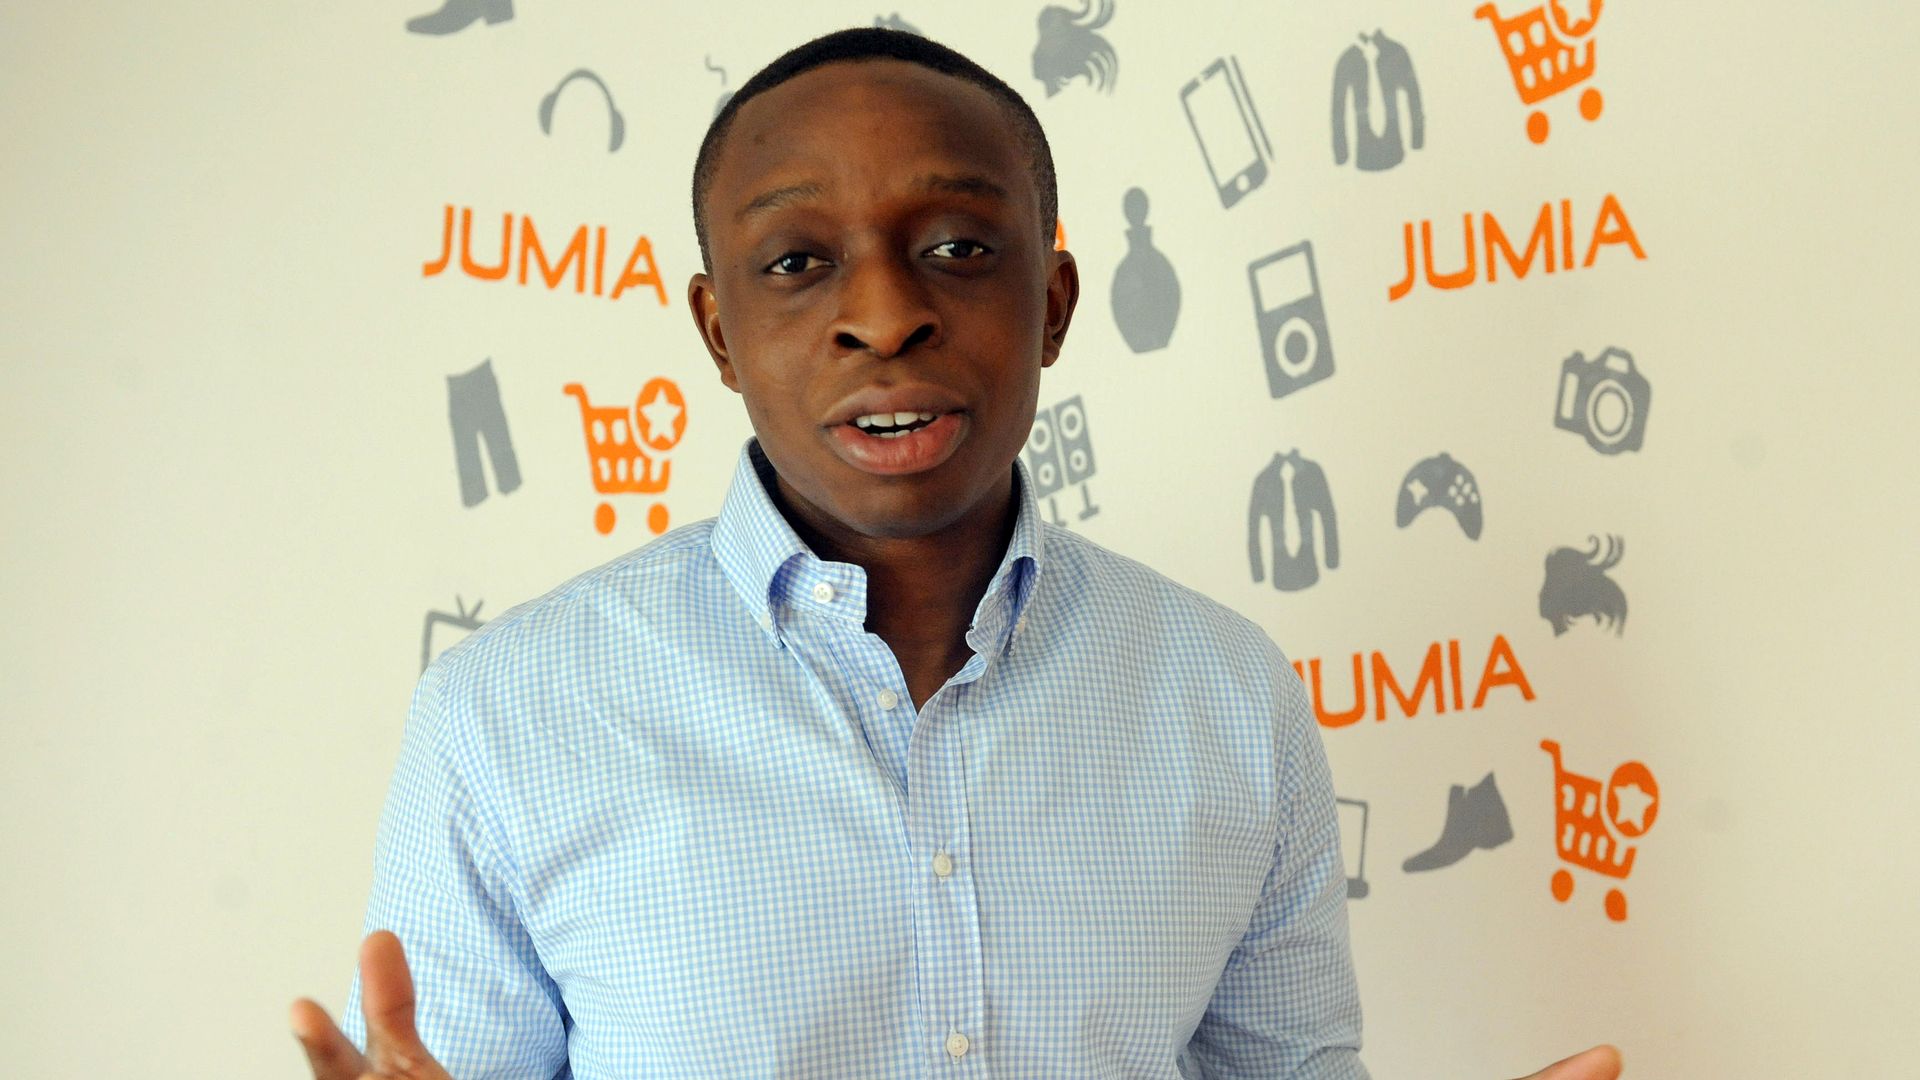 Co-founder of Jumia, Tunde Kehinde, stands and speaks in front of a wallpaper that displays the Jumia logo.